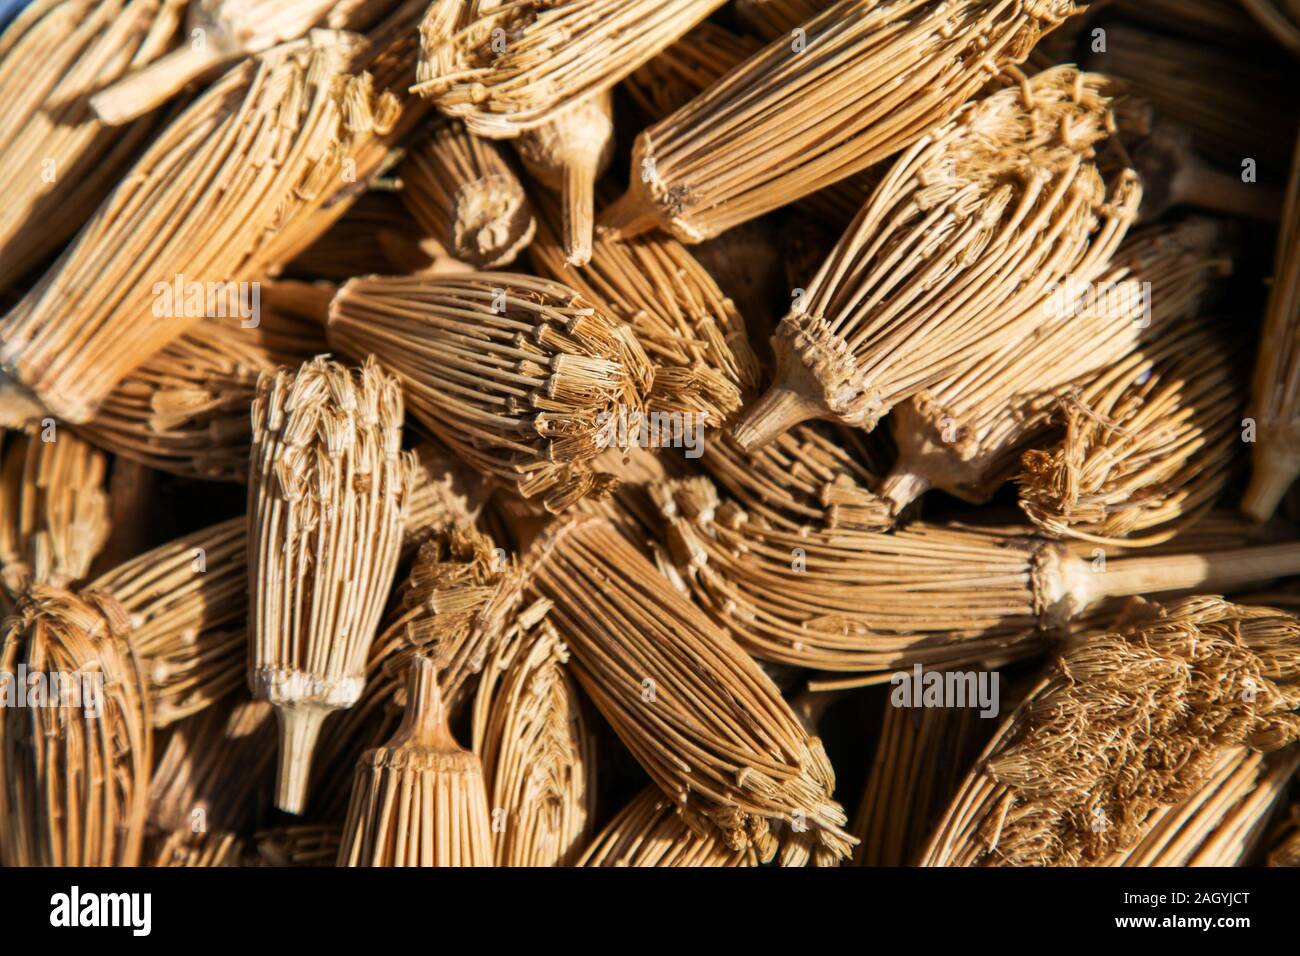 Dried flowers used as toothpicks in Morocco Stock Photo